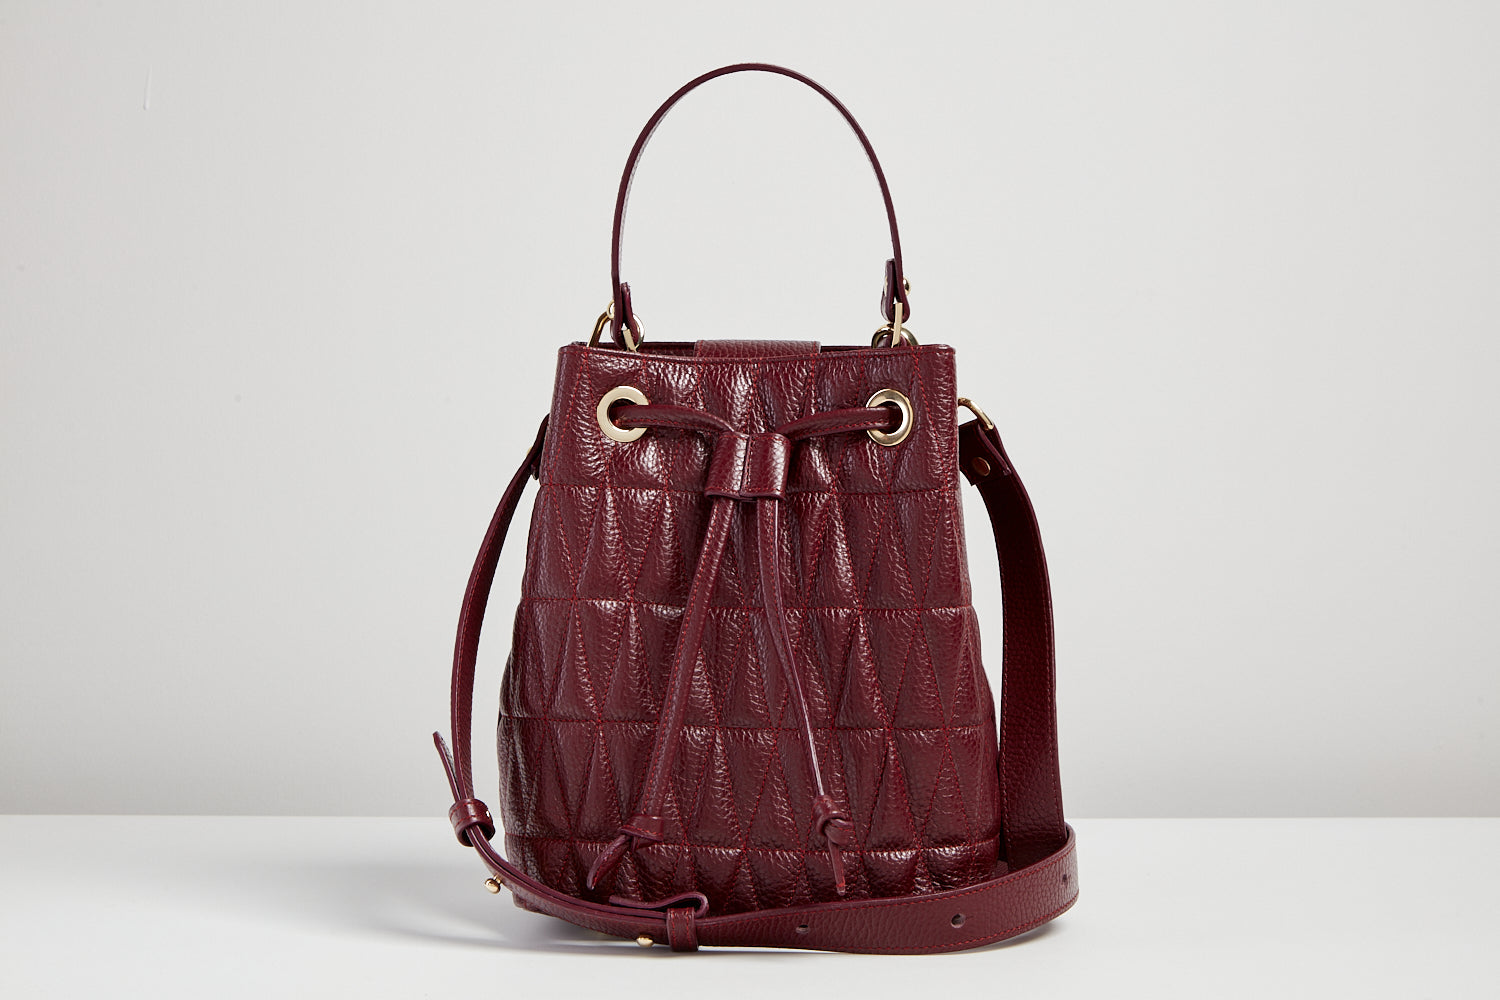 flo&sue bordeaux / burgundy leather Quilted Bucket Bag